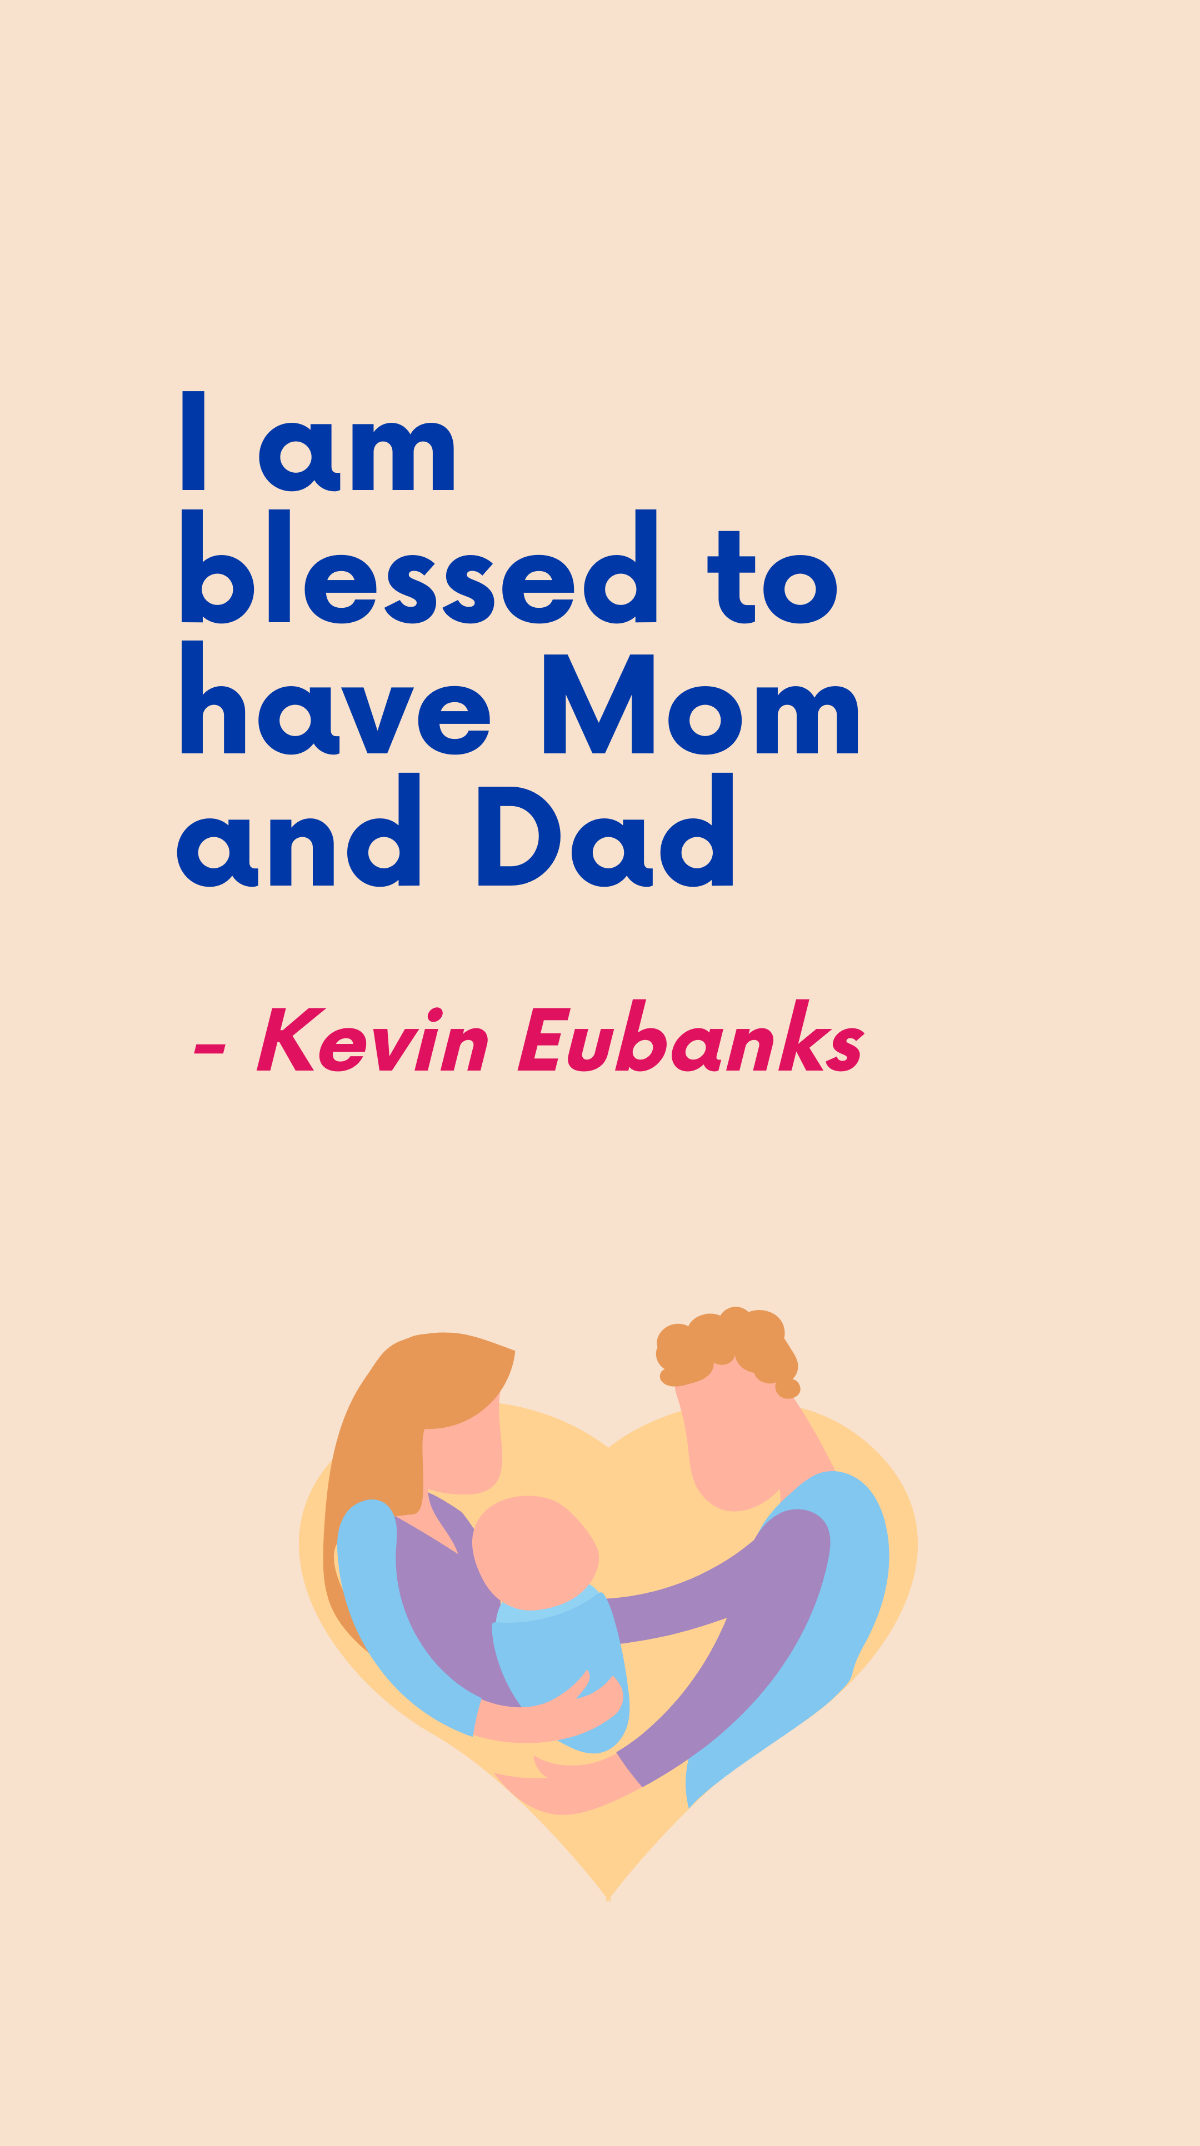 Kevin Eubanks - I am blessed to have Mom and Dad